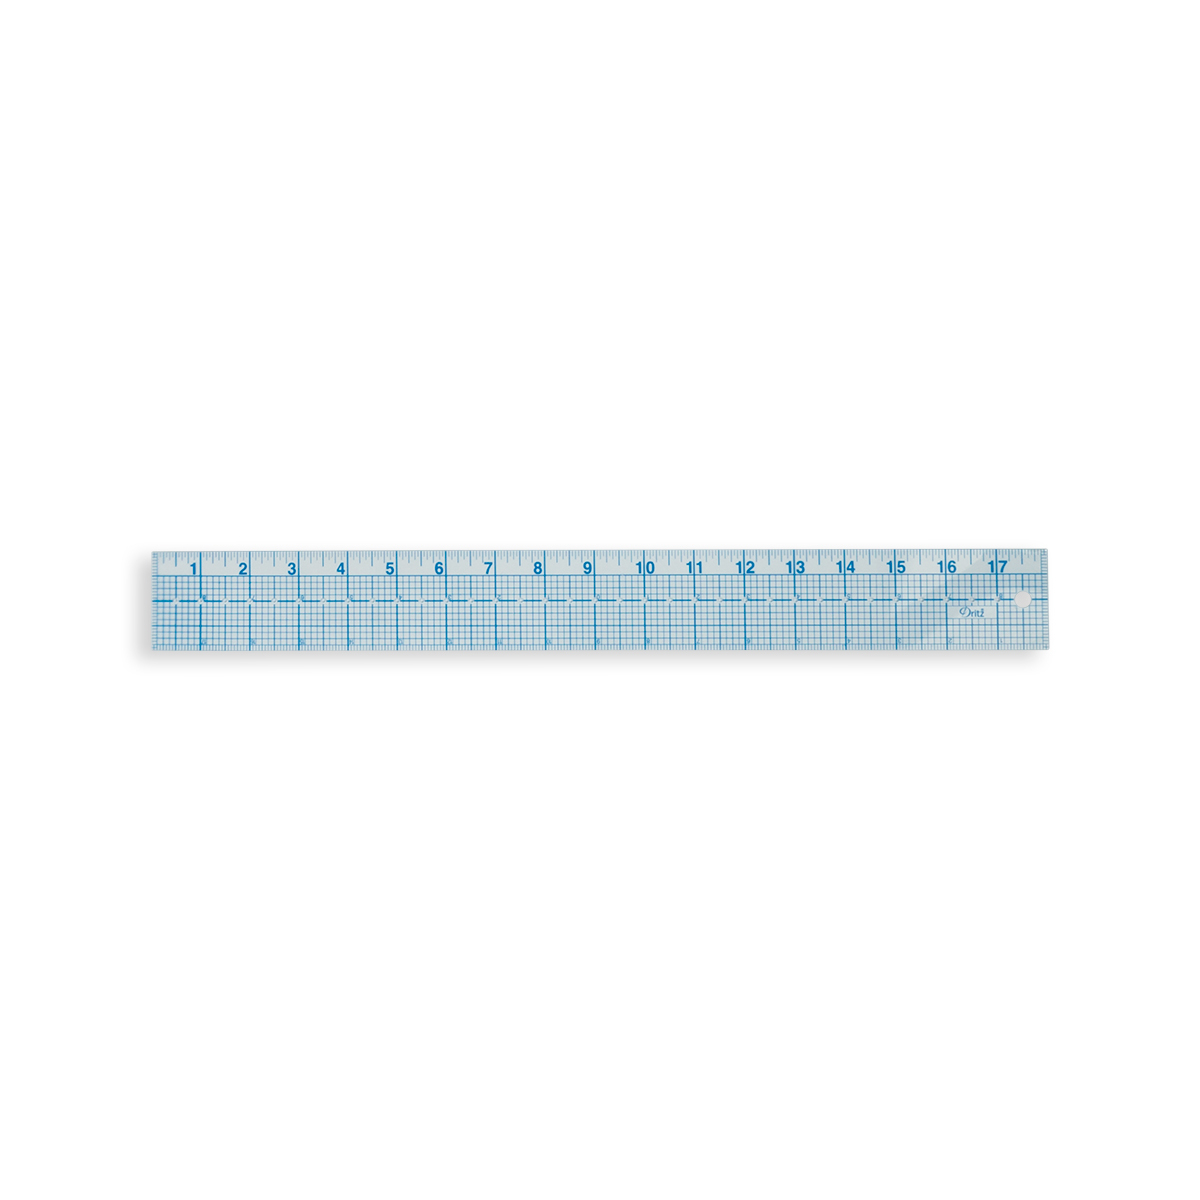 Zero-Centering Plastic Ruler 12 Inch Clear Acrylic Ruler Measuring Scale  Tools For No More Counting